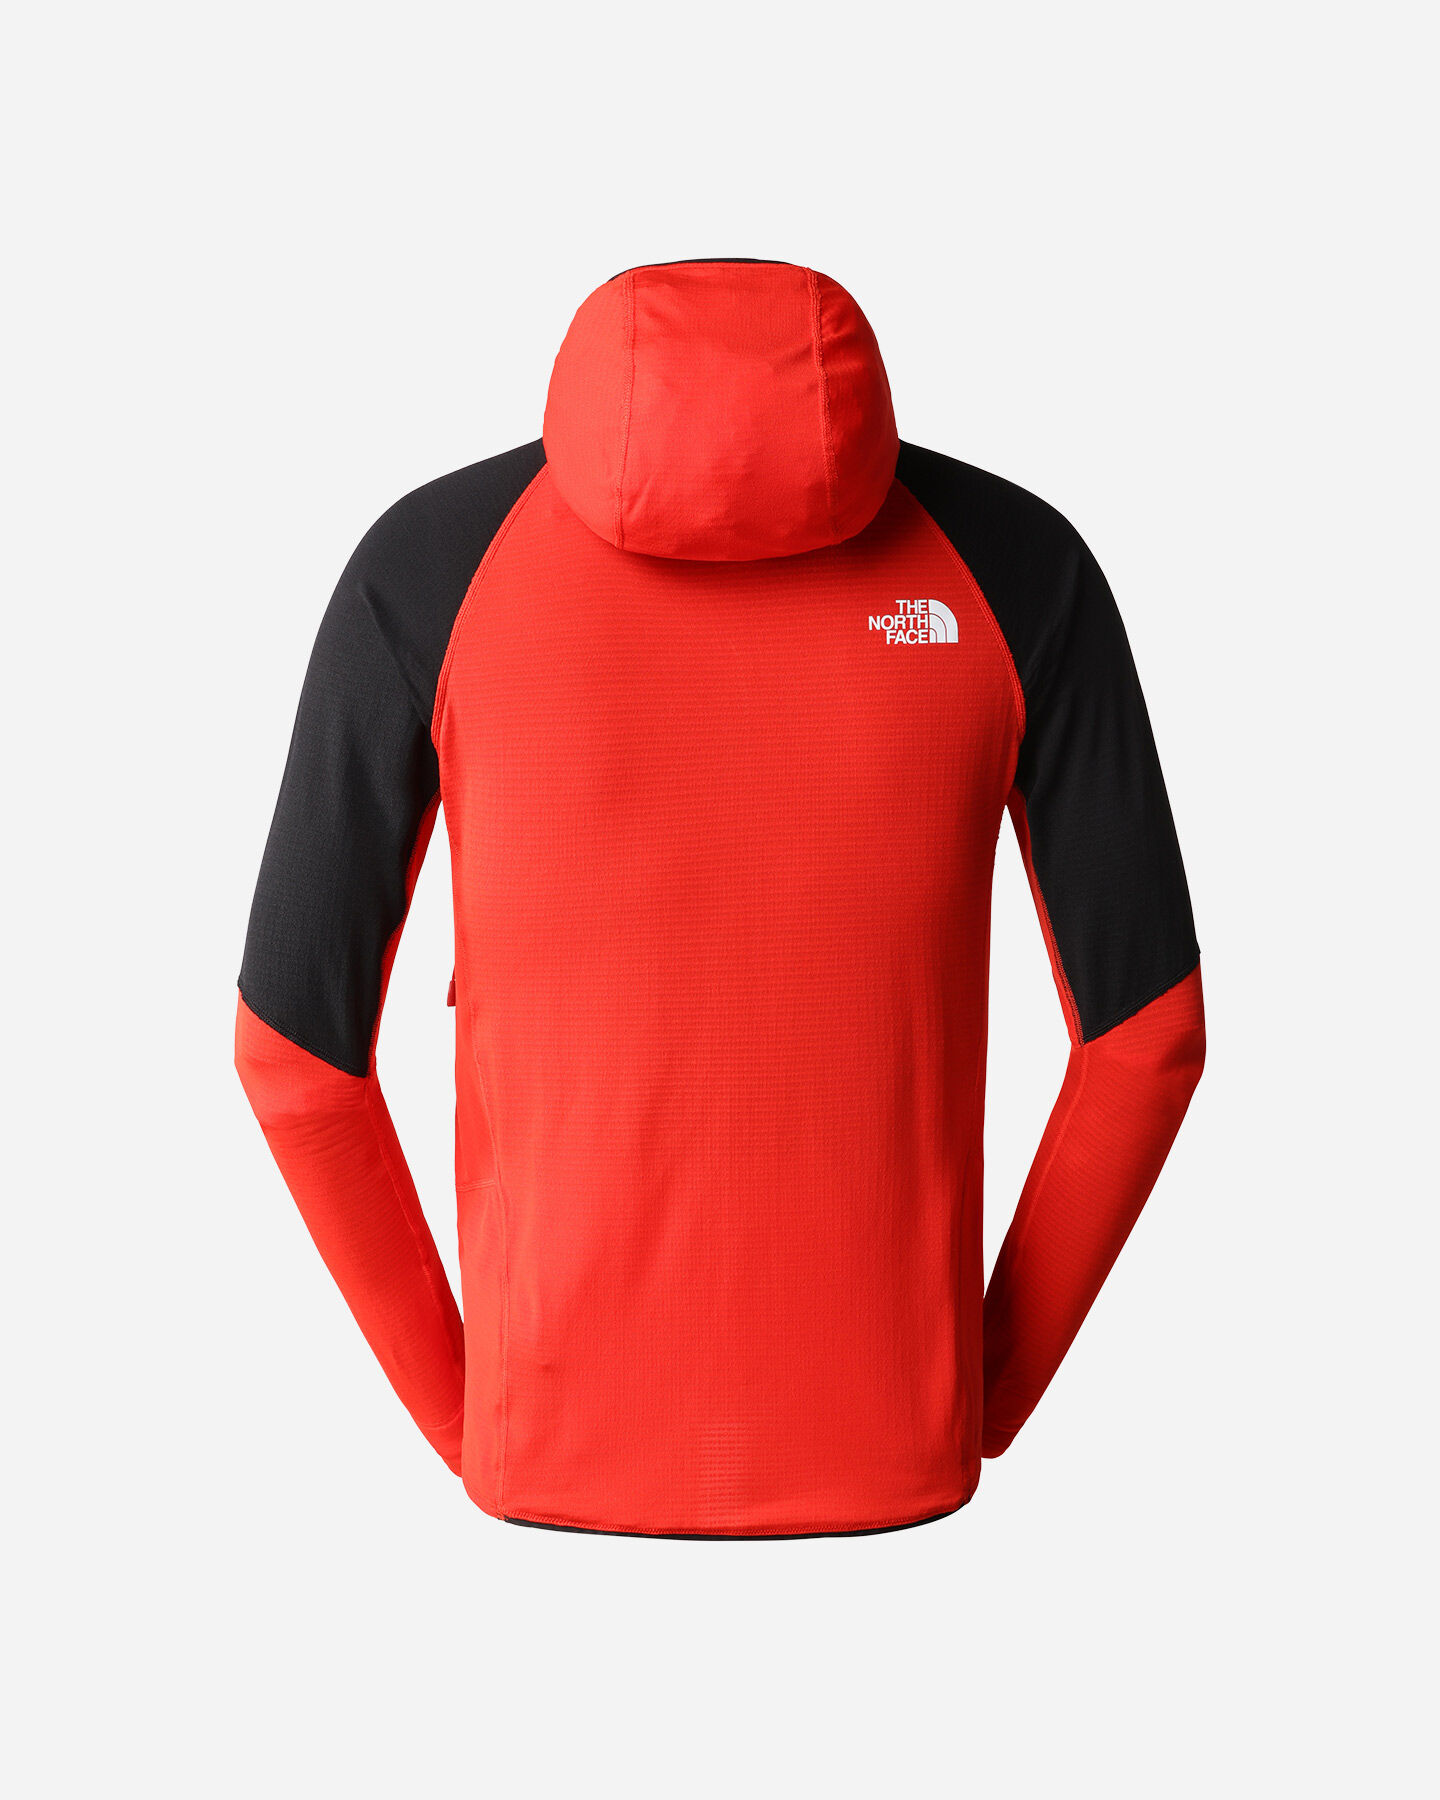  Pile THE NORTH FACE BOLT M S5537077 scatto 1